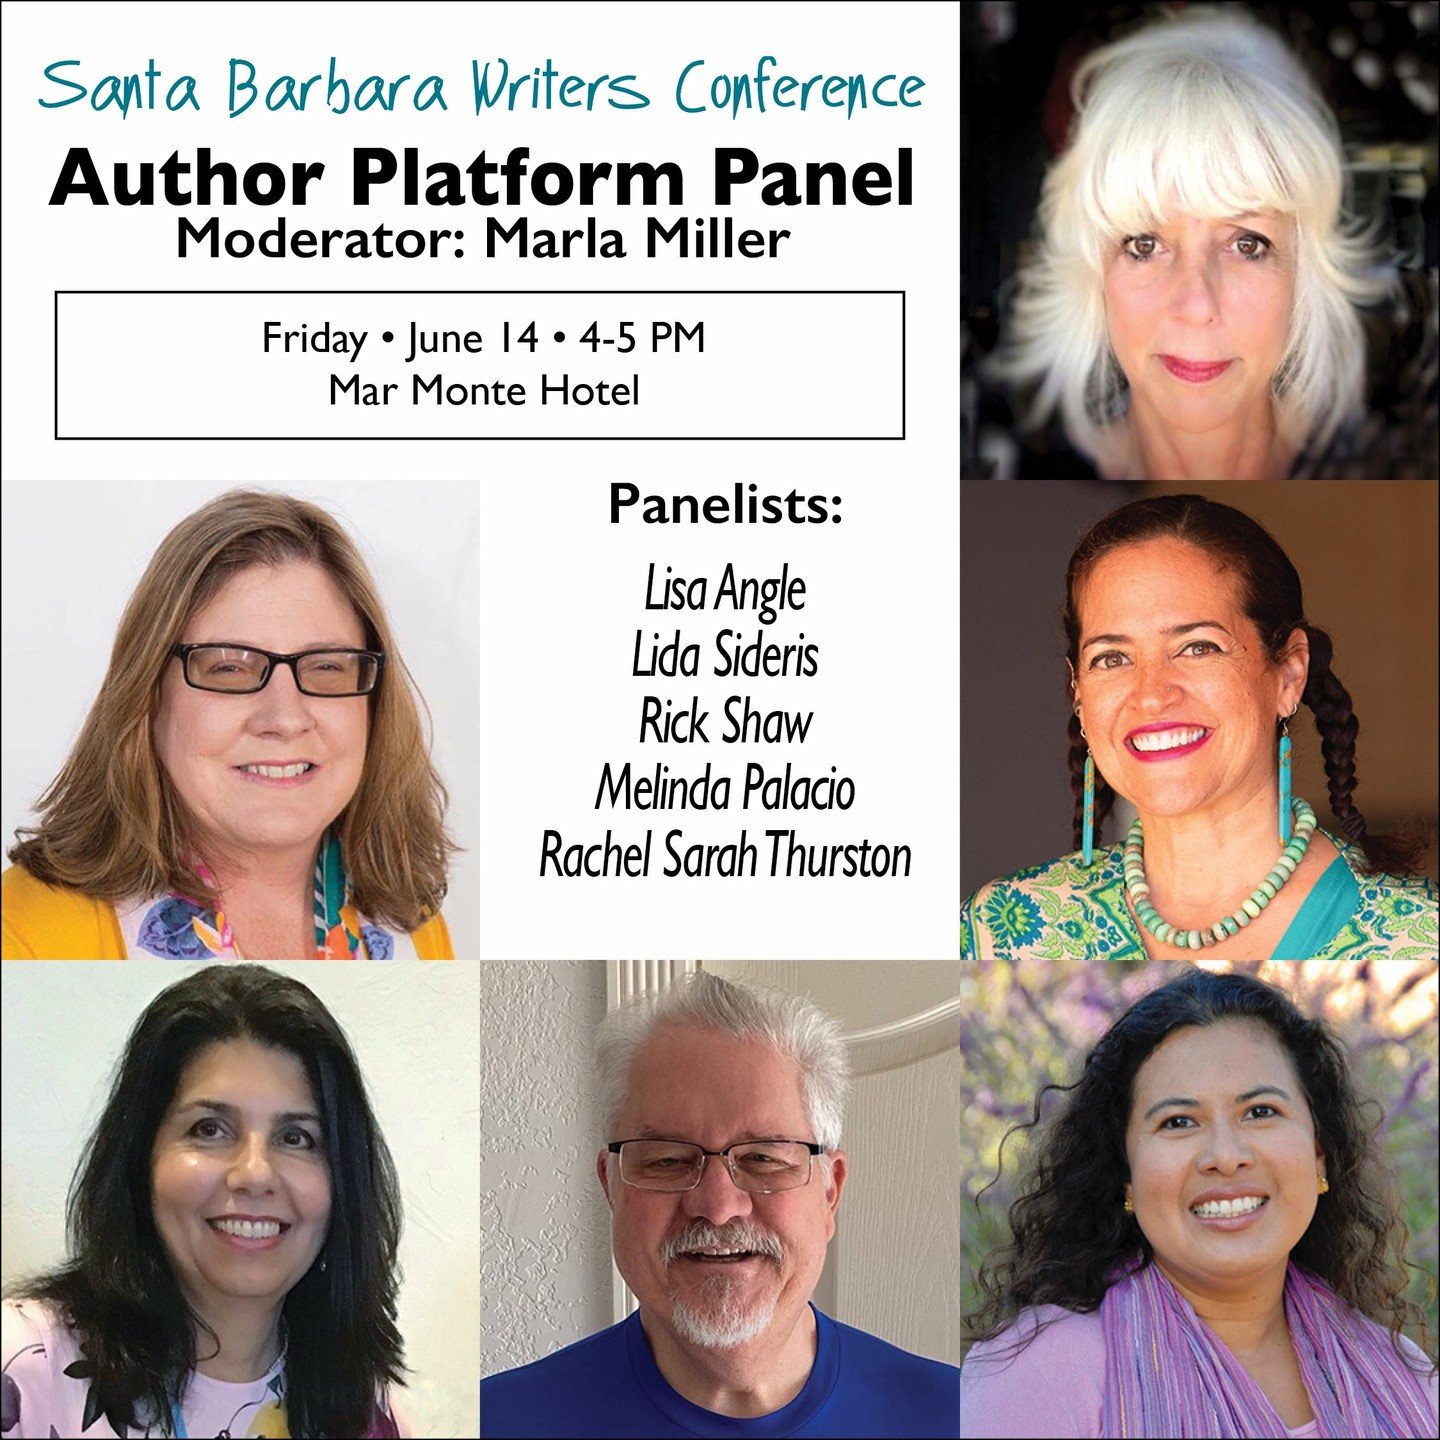 &ldquo;Author Platform&rdquo; is a term that evades definition&hellip;but to achieve success, authors know they need it. This panel of experts covers a broad range of possibilities to promote both you and your published works. Building your platform 